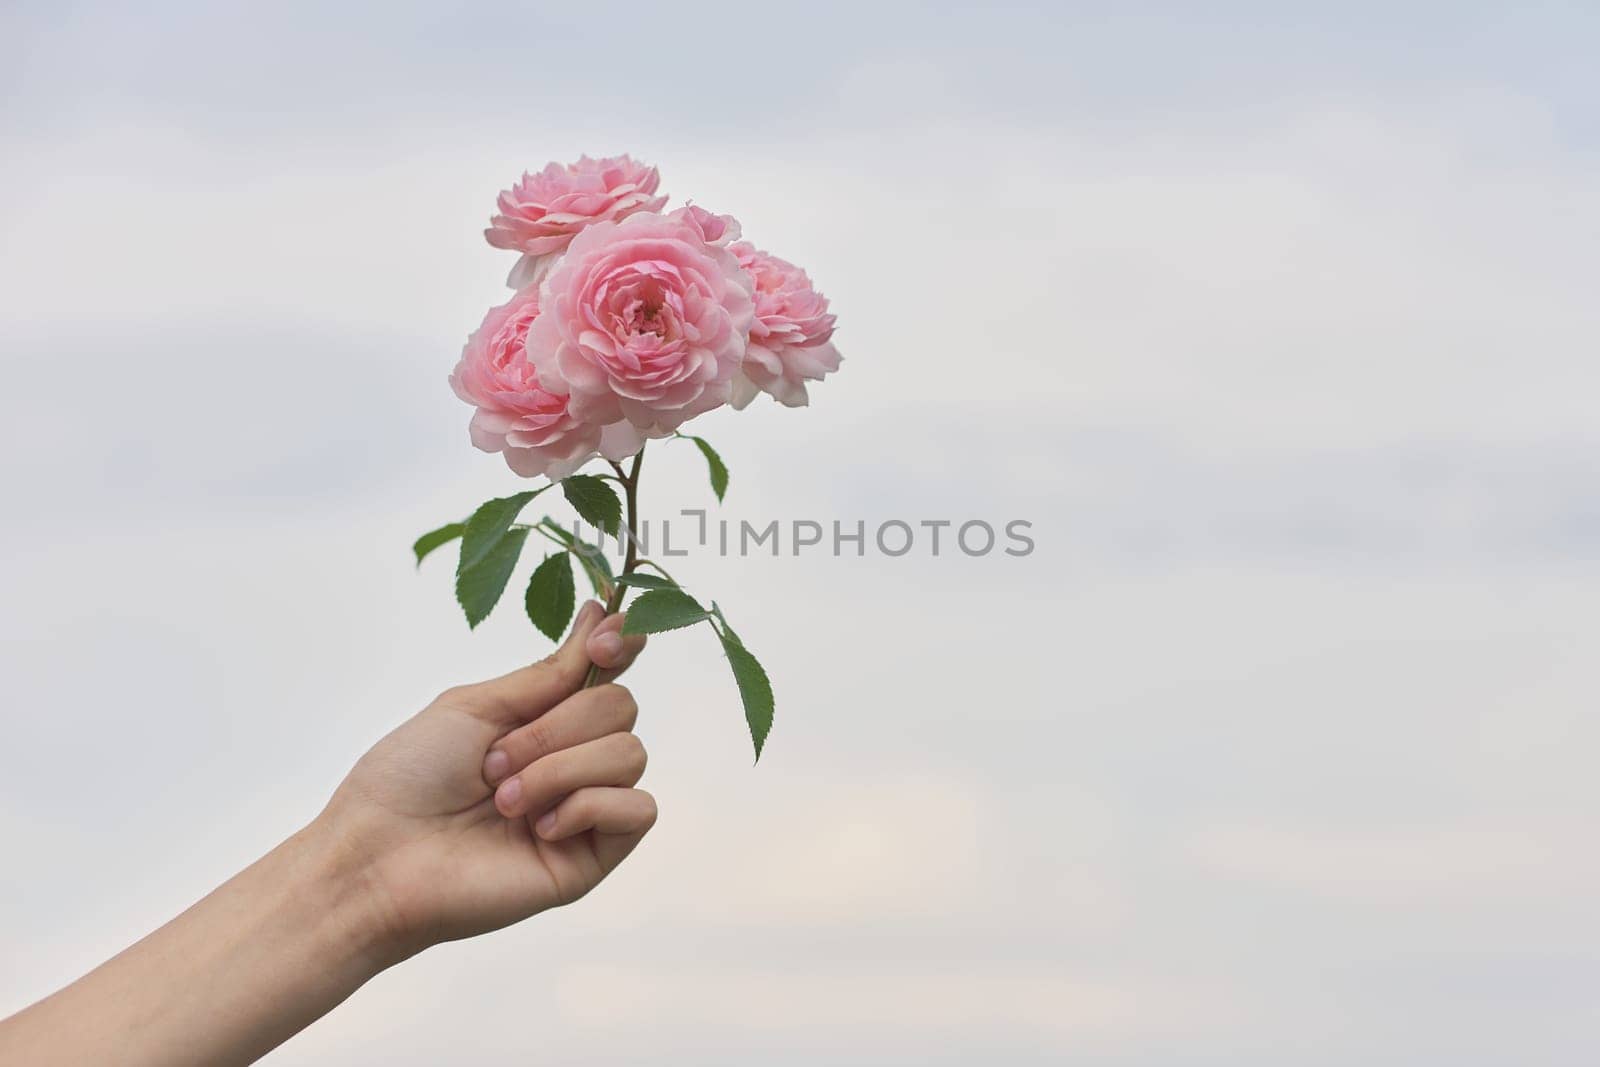 Female hand holding pink rose flower, background blue clear sky in clouds, copy space. Giving flower gift, holiday day